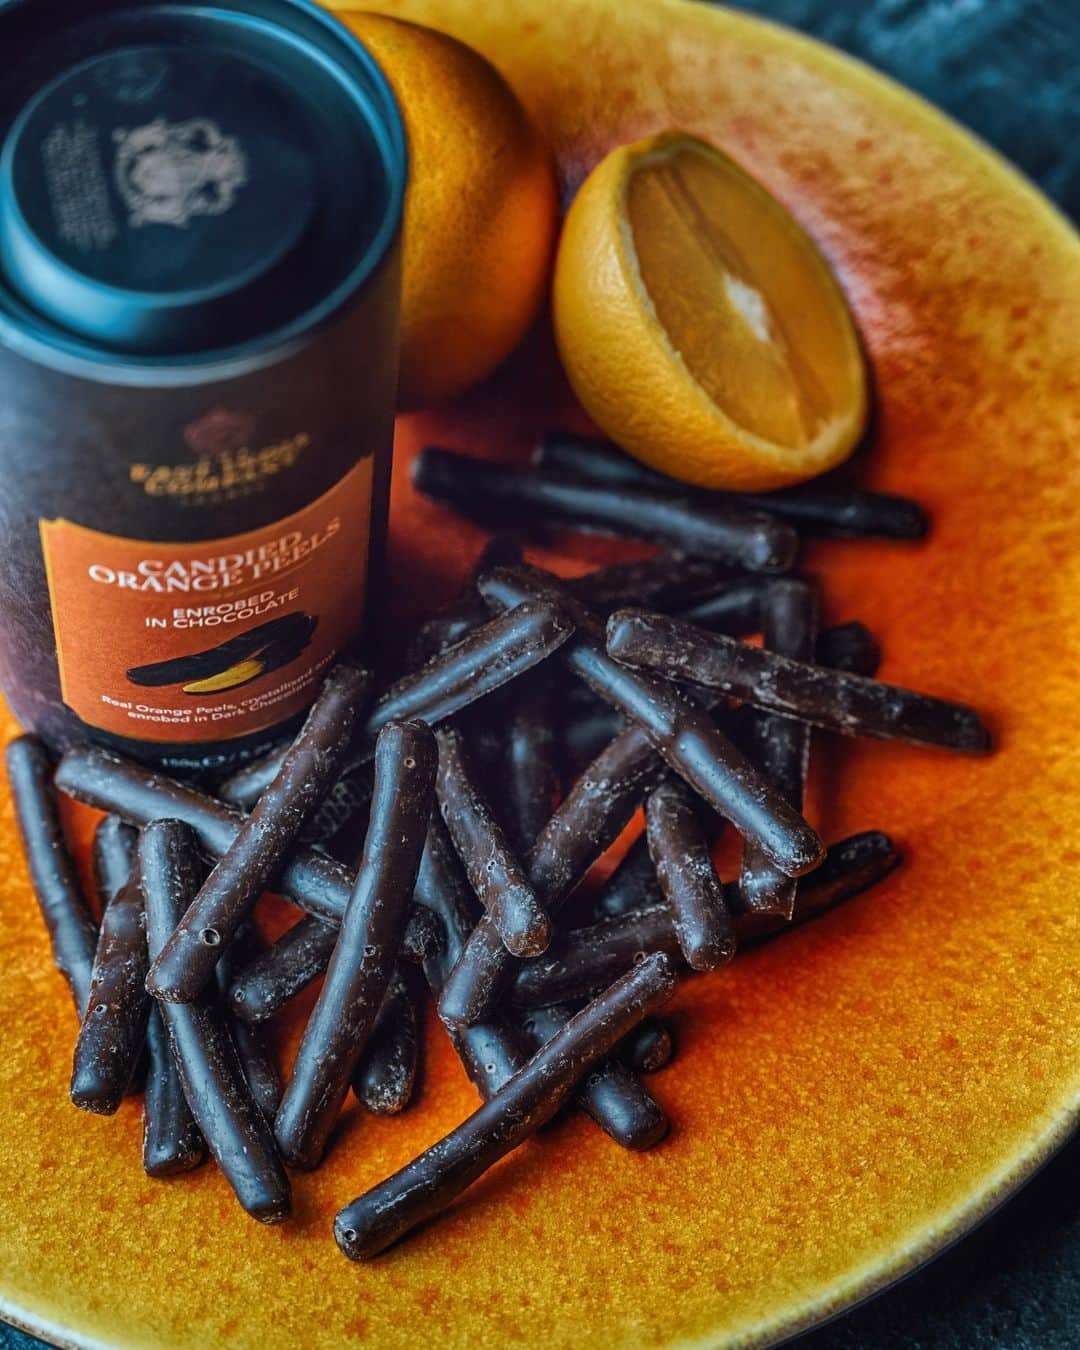 The East India Companyのインスタグラム：「Rich Belgian dark chocolate hides a golden glow of crystallised sweet Sicilian orange peel. Sumptious, sweet, decadent perfection.  #theeastindiacompany #chocolate #artisianchocolate #orange #sicilian #sweet #orangechocolate #sicily #luxury #luxuryfood #finefoods」